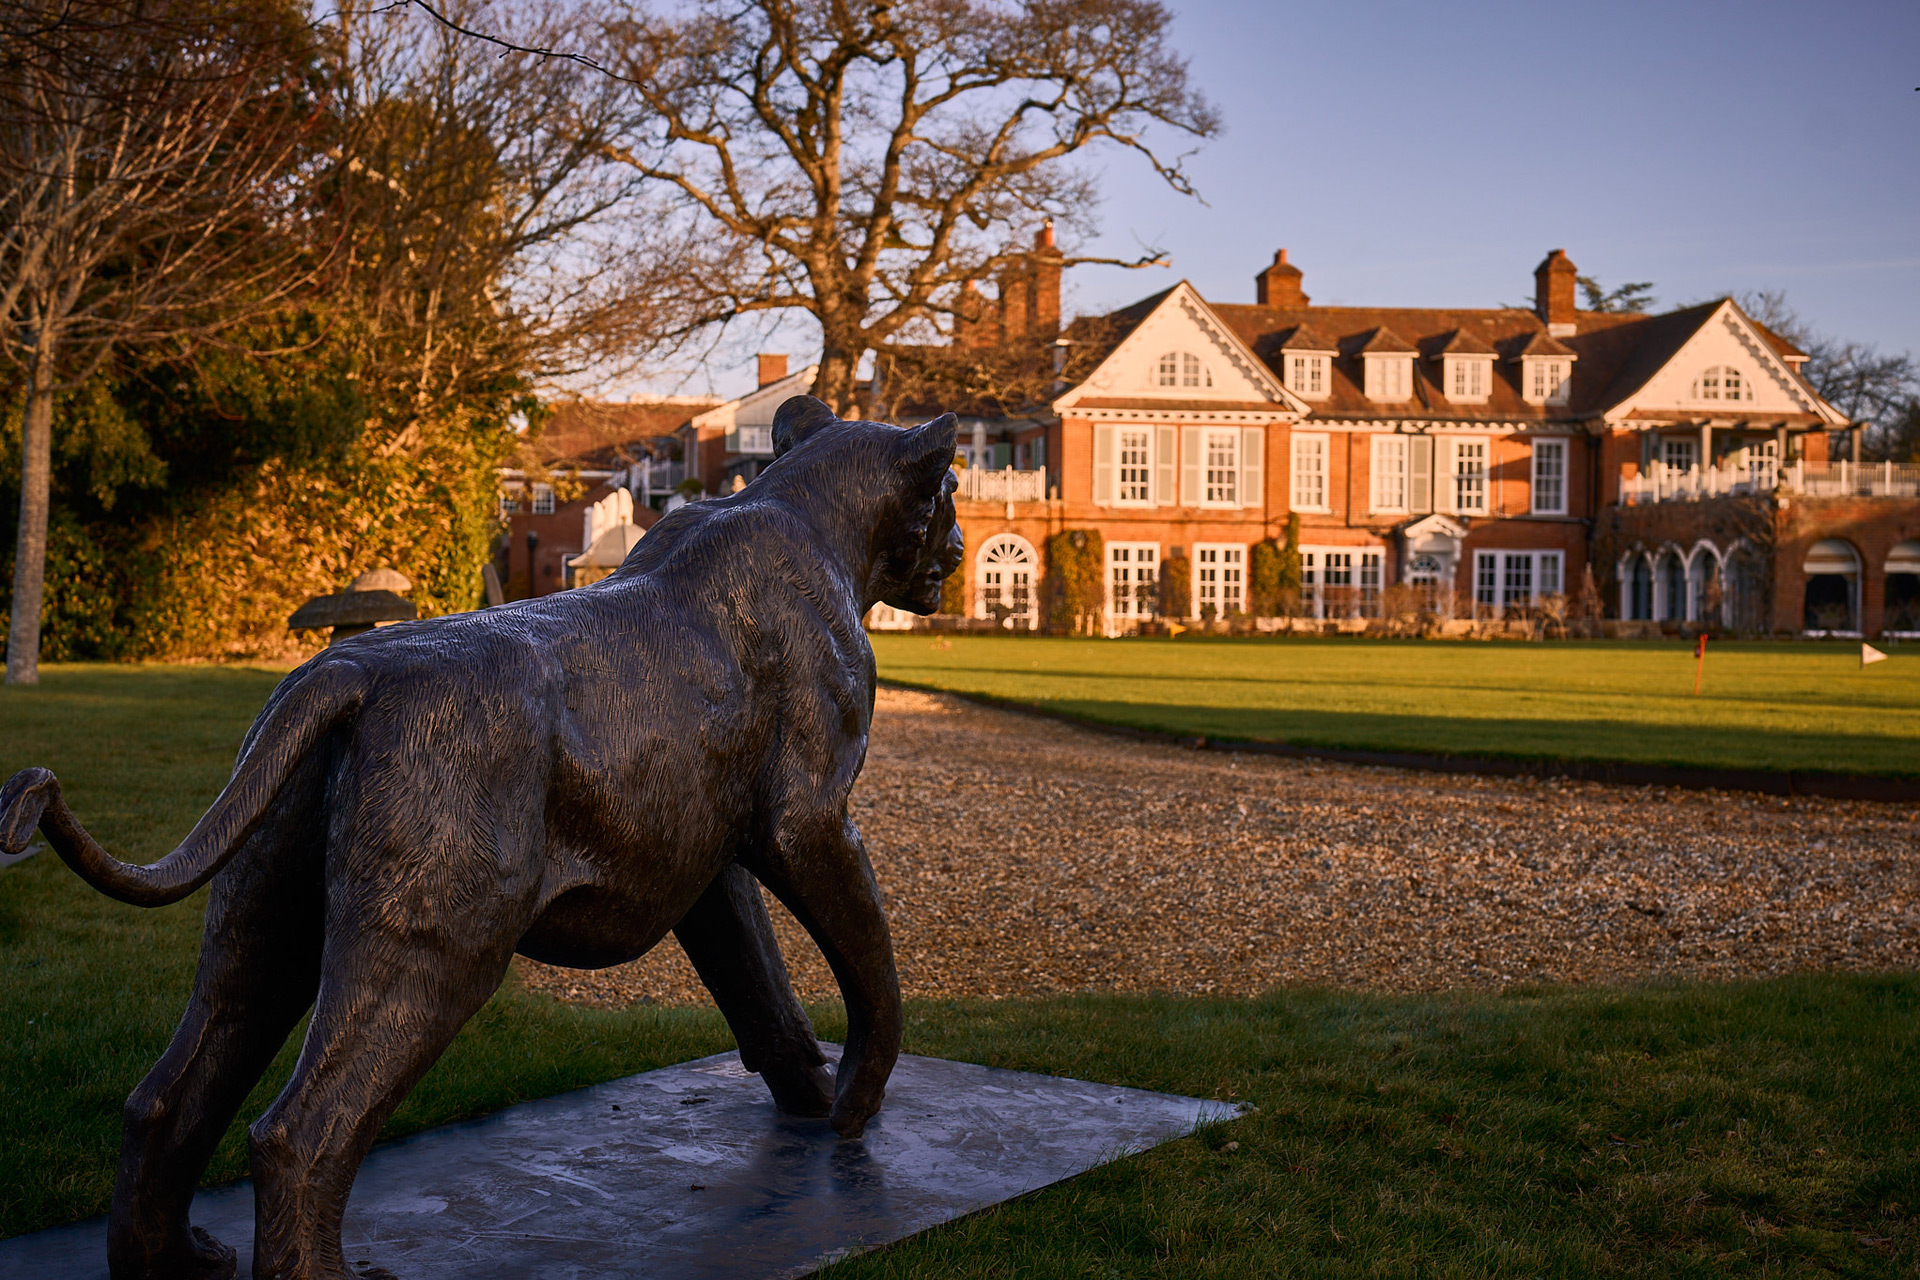 Grand red brick New Forest hotel with prowling lion sculpture in front.